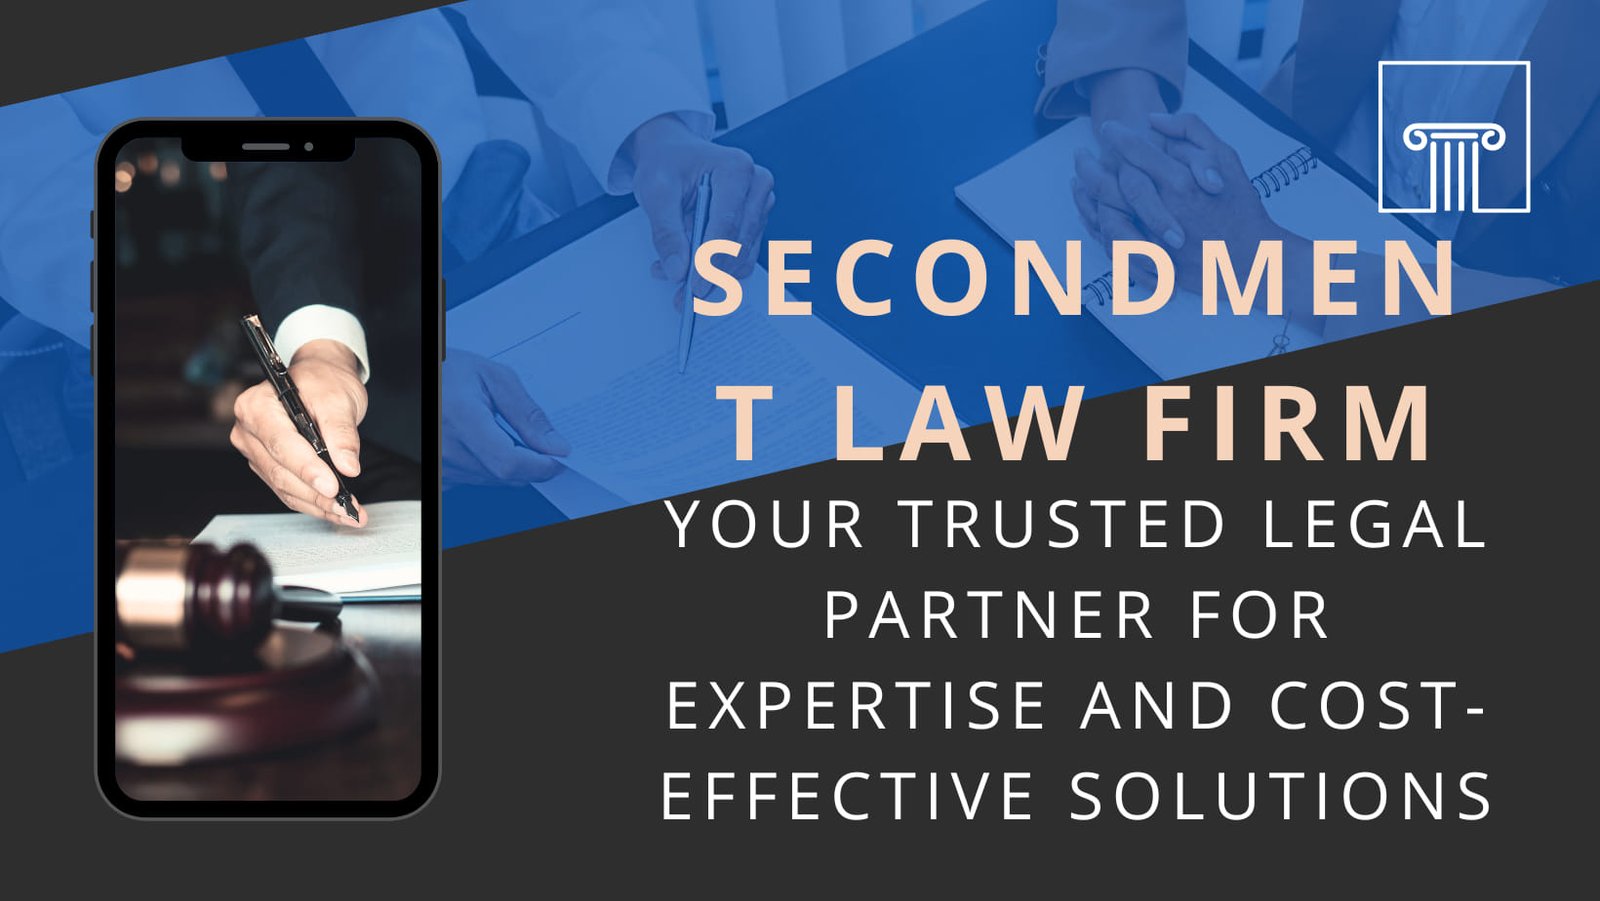 Secondment Law Firm: Your Trusted Legal Partner for Expertise and Cost-Effective Solutions